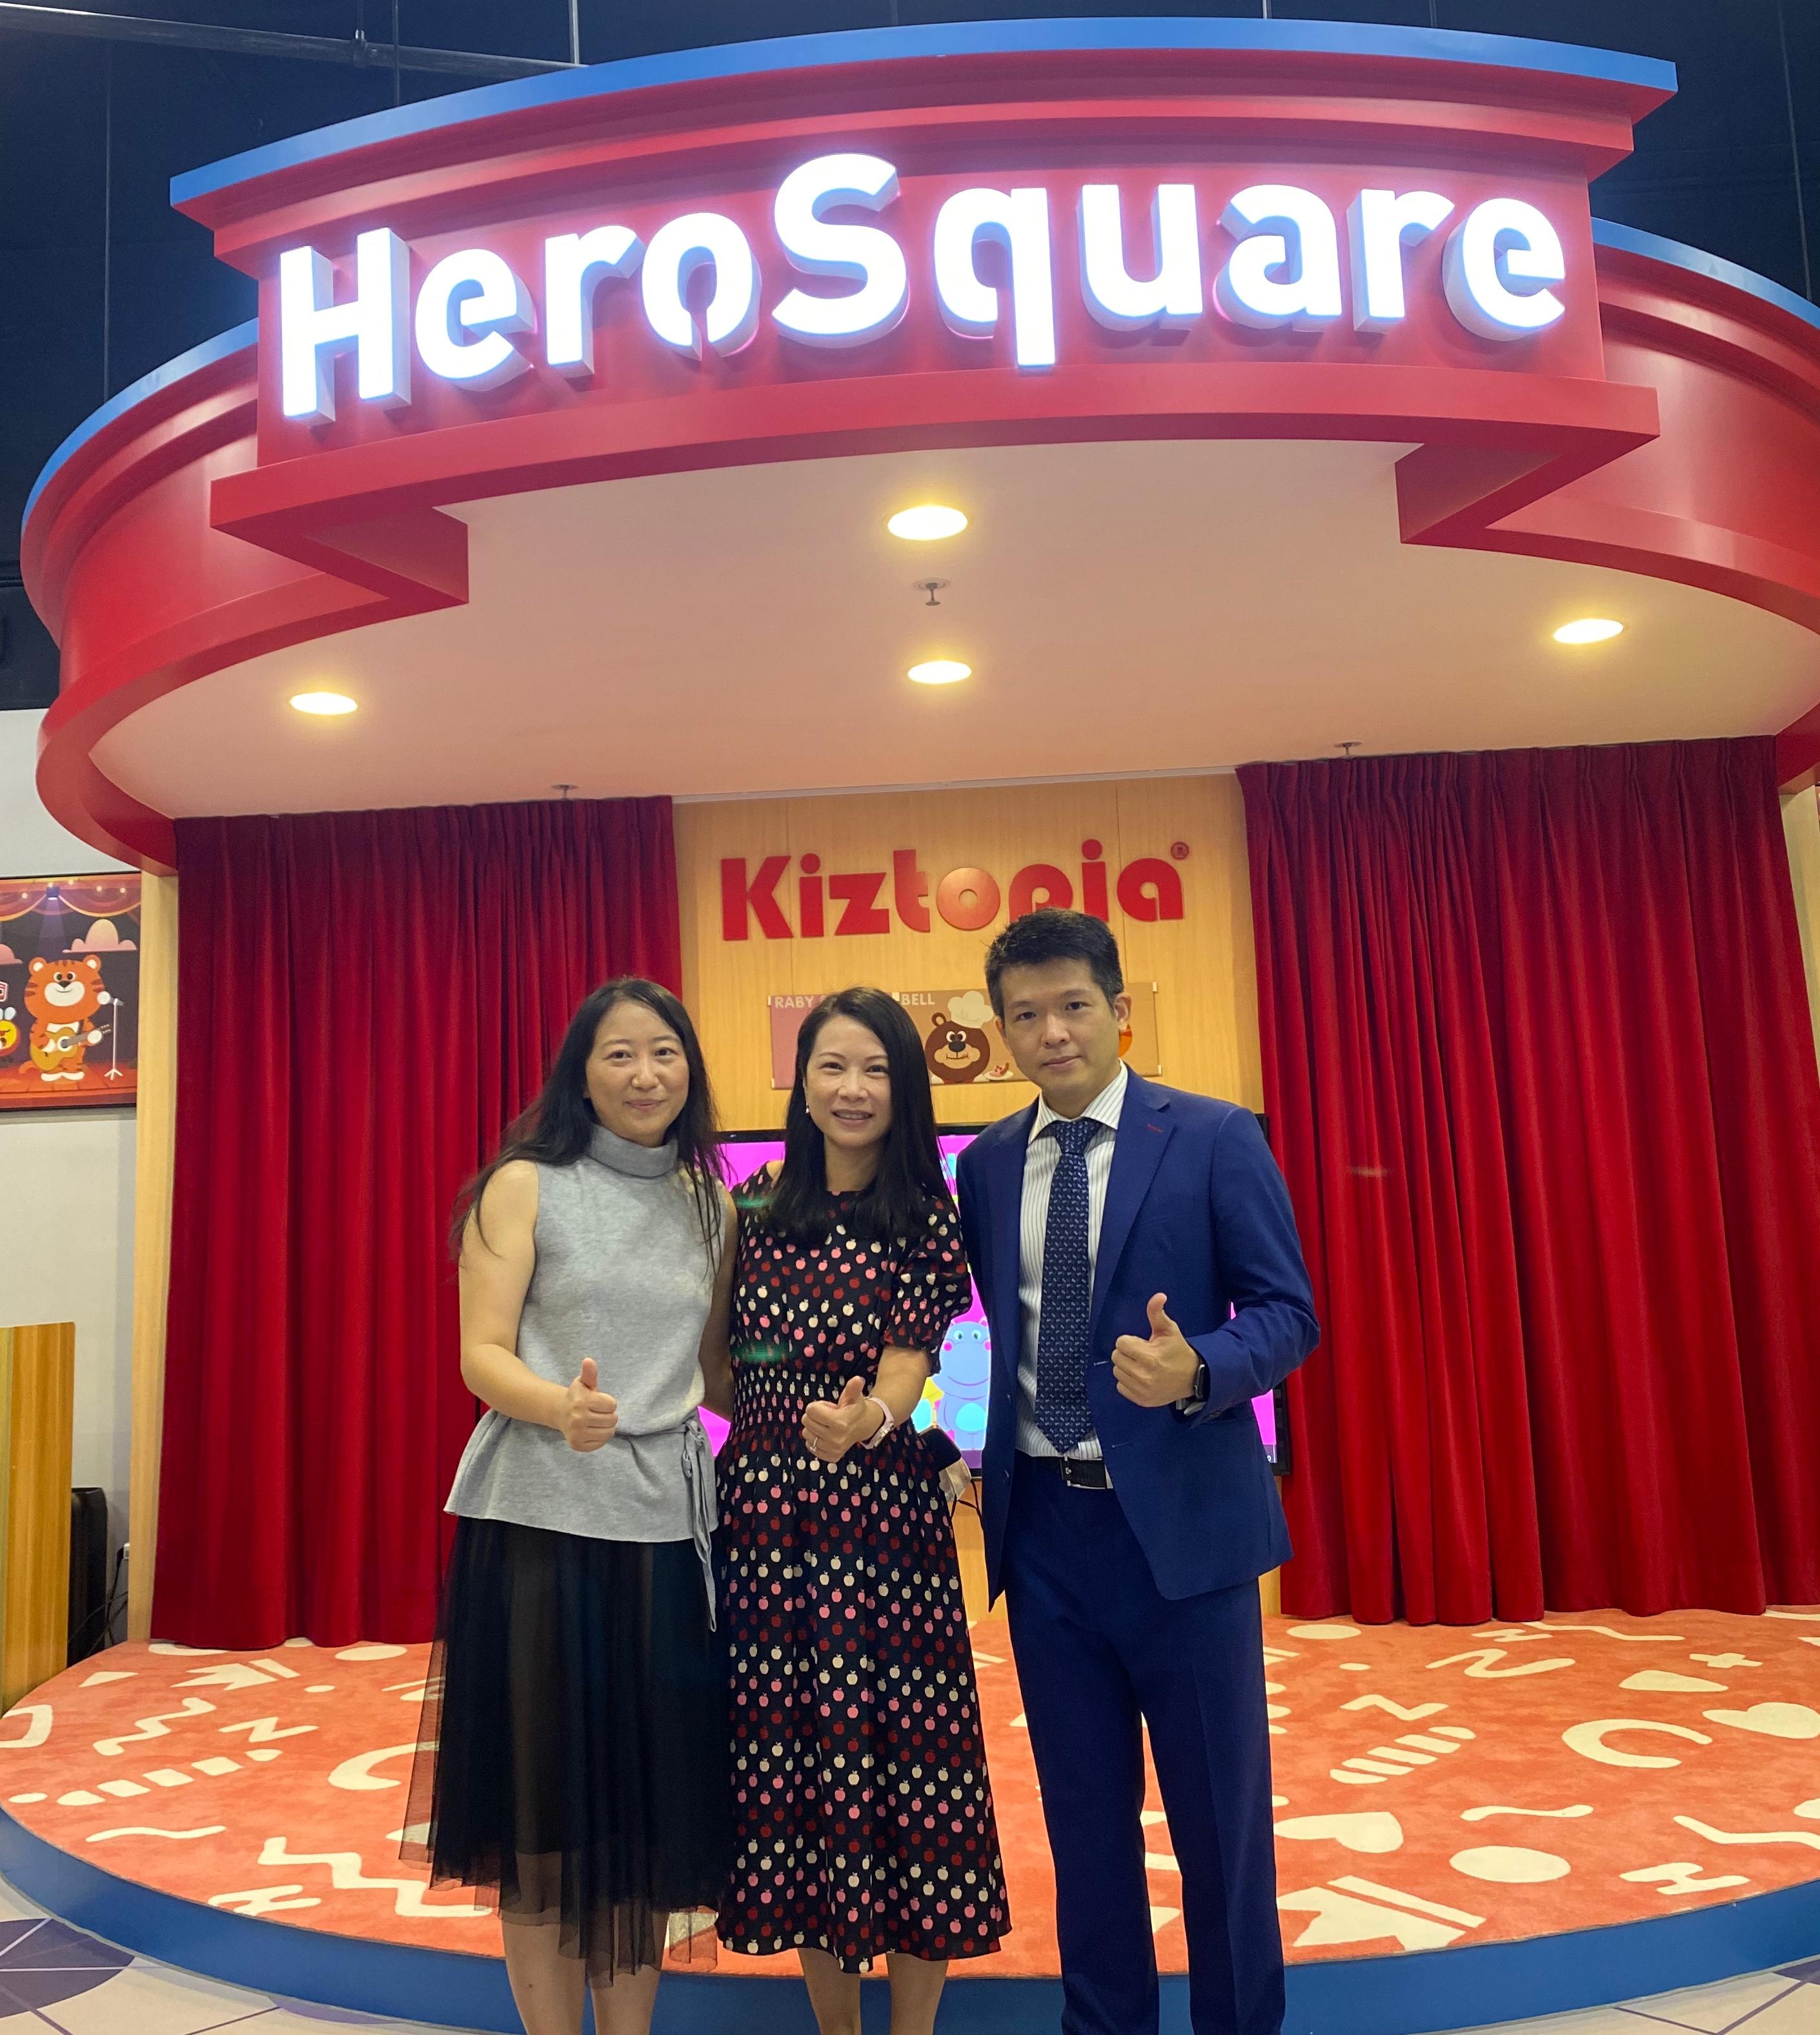 Singapore's mega indoor theme park operator Kiztopia officially opened its first overseas outlet in Hong Kong today (September 30). Photo shows (from left) Founder and CEO of Kiztopia Ms Heidi Tian; the Head of Tourism & Hospitality at Invest Hong Kong, Ms Sindy Wong; and the Director of Kiztopia, Mr Ricky Ng, at the opening. 